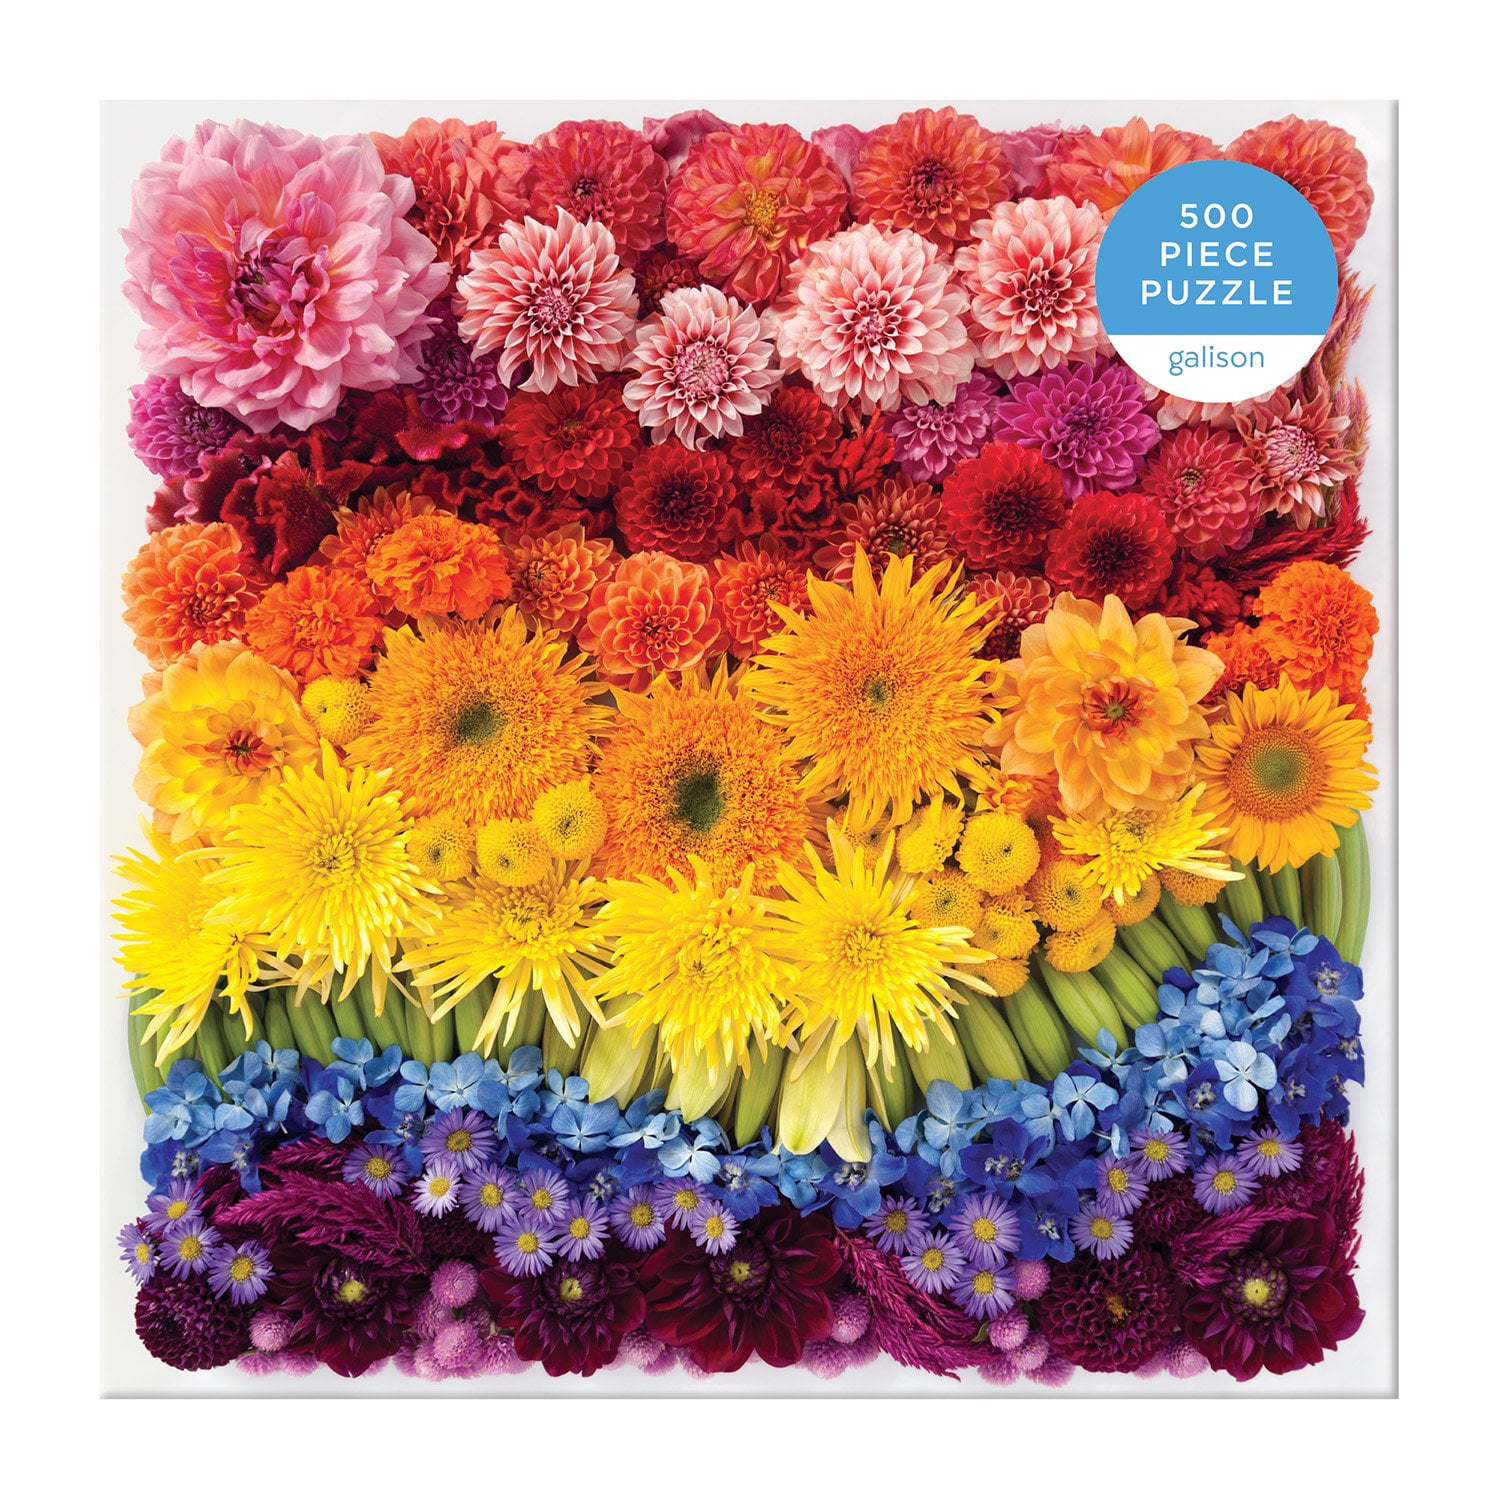 1000 Piece Rainbow Flowers Jigsaw Puzzles For Adults NW Learning Education O9N8 